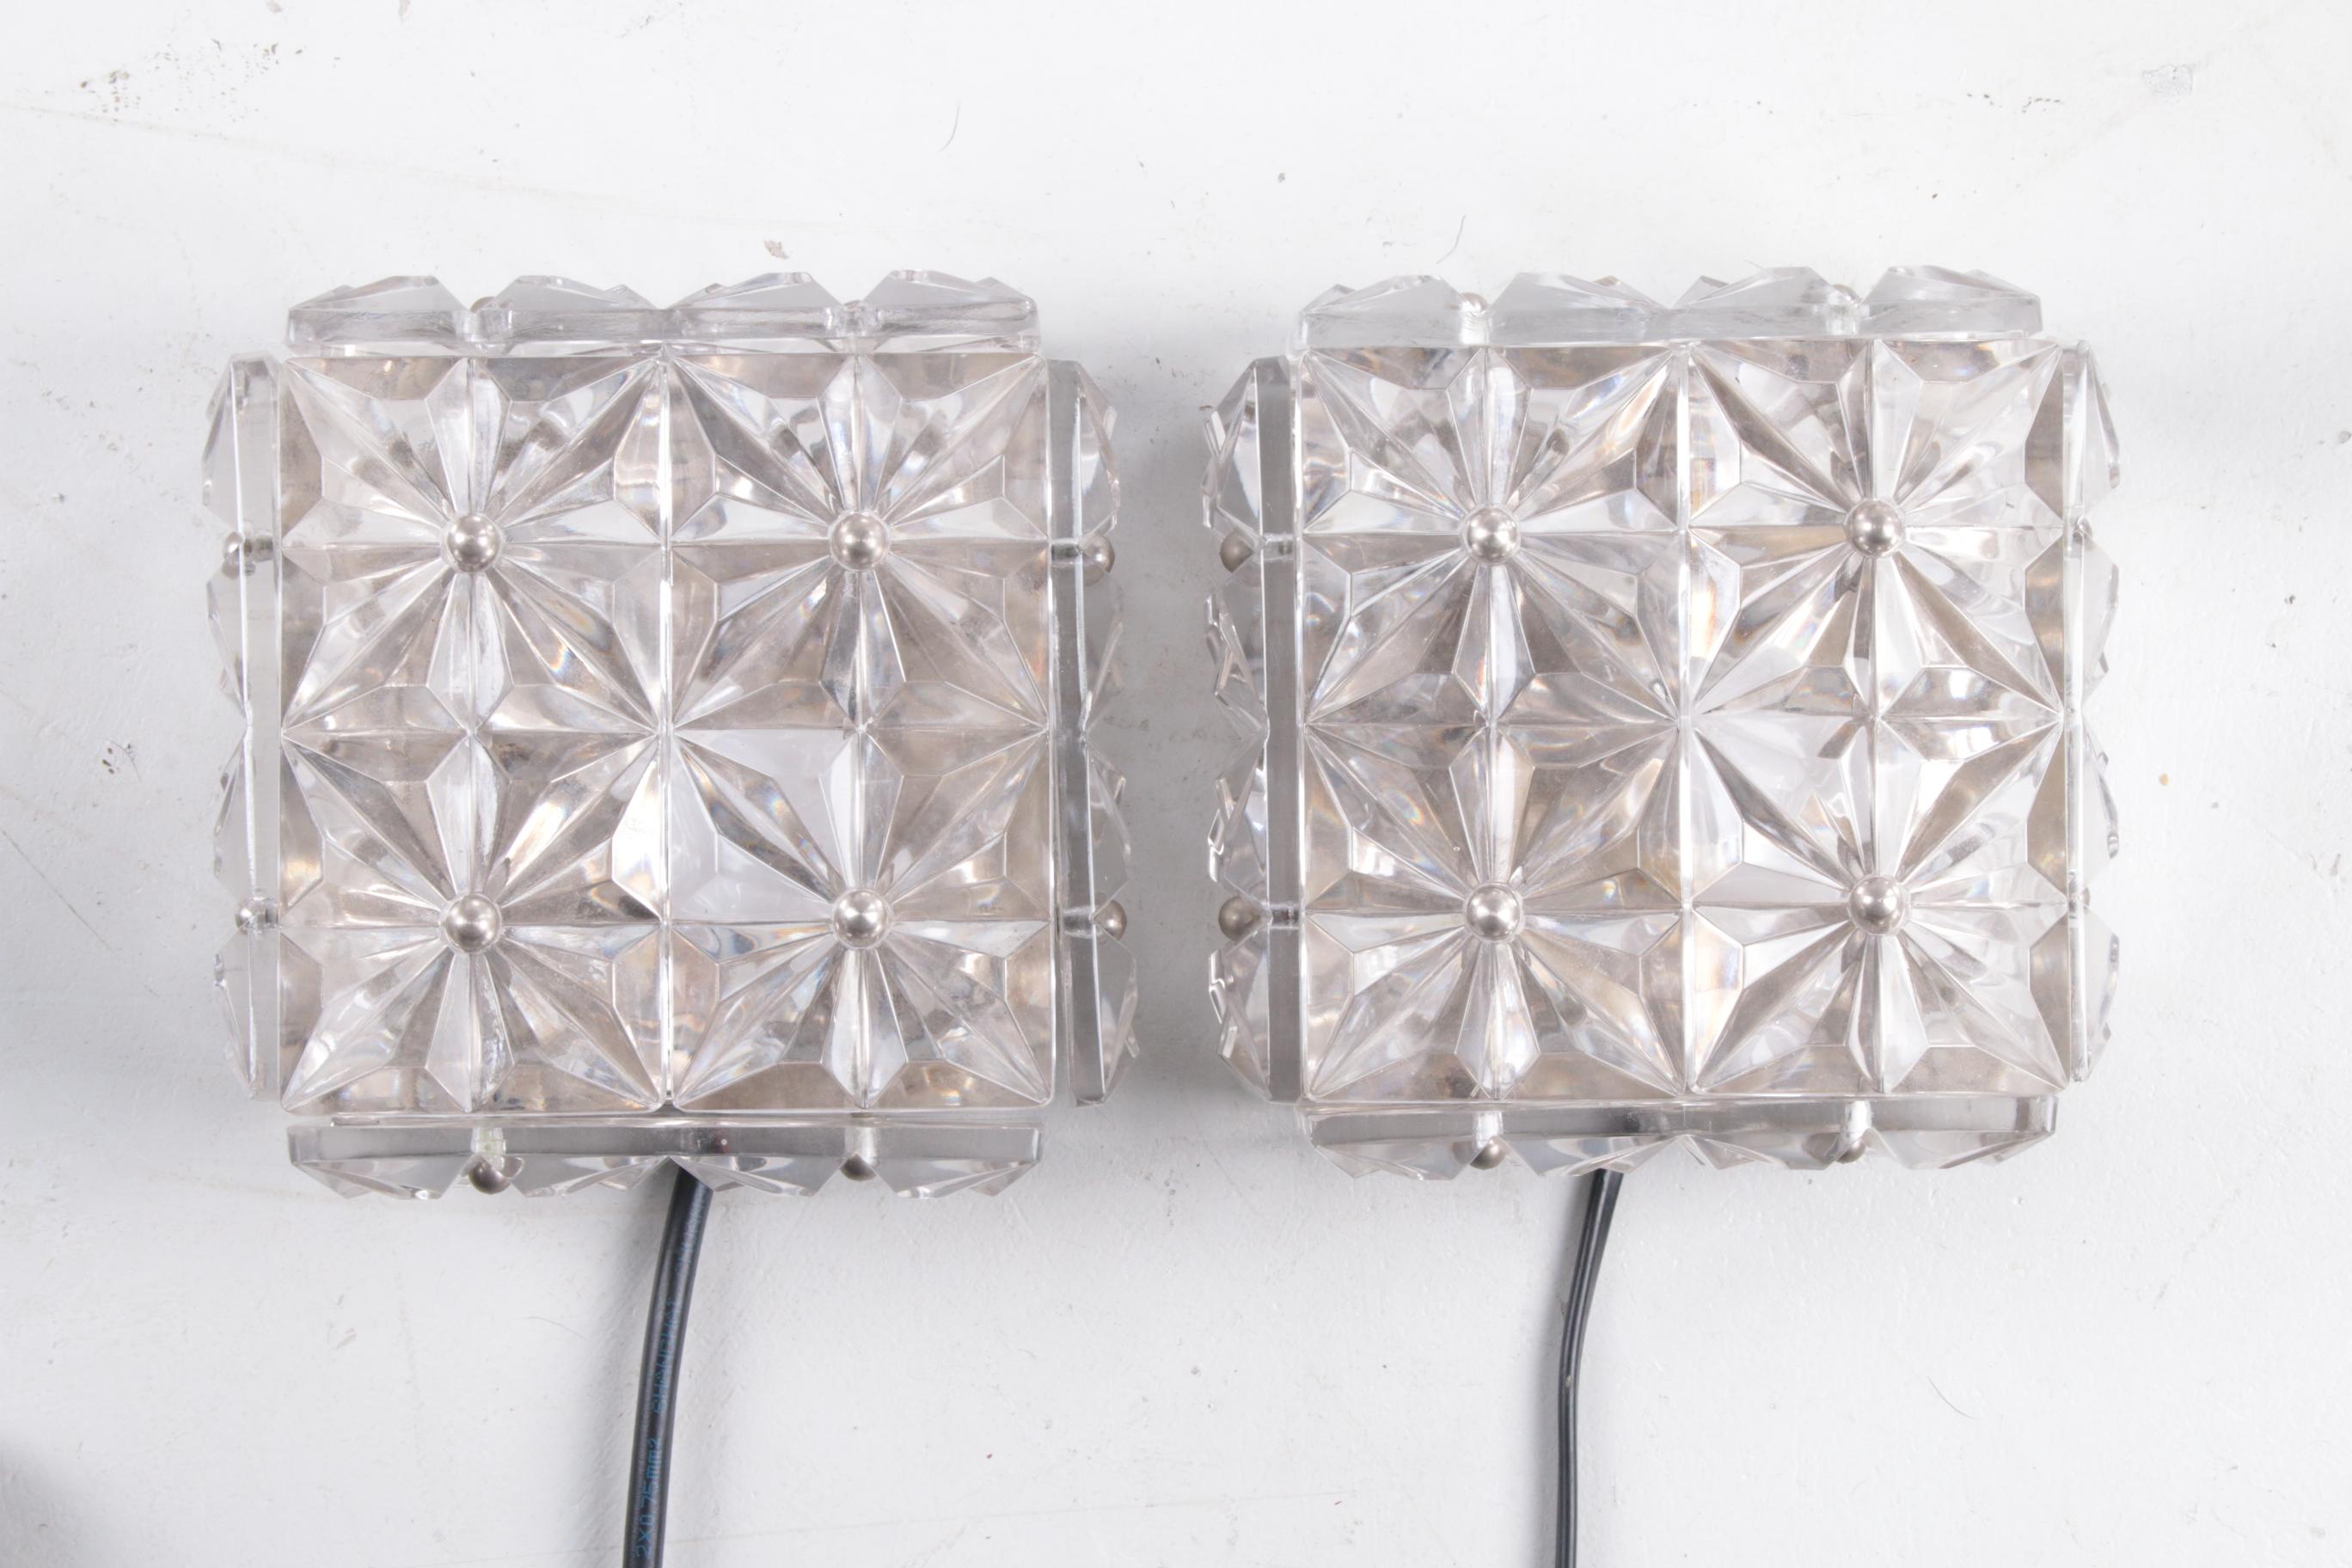 Pair of chrome & crystal glass wall lamps by Kinkeldey, 1970s

Pair of square lamps by Kinkeldey, Germany, manufactured in the mid-century, circa 1970 (late 60s or early 70s). A chrome frame holds 12 small square cut crystal lenses. They can be